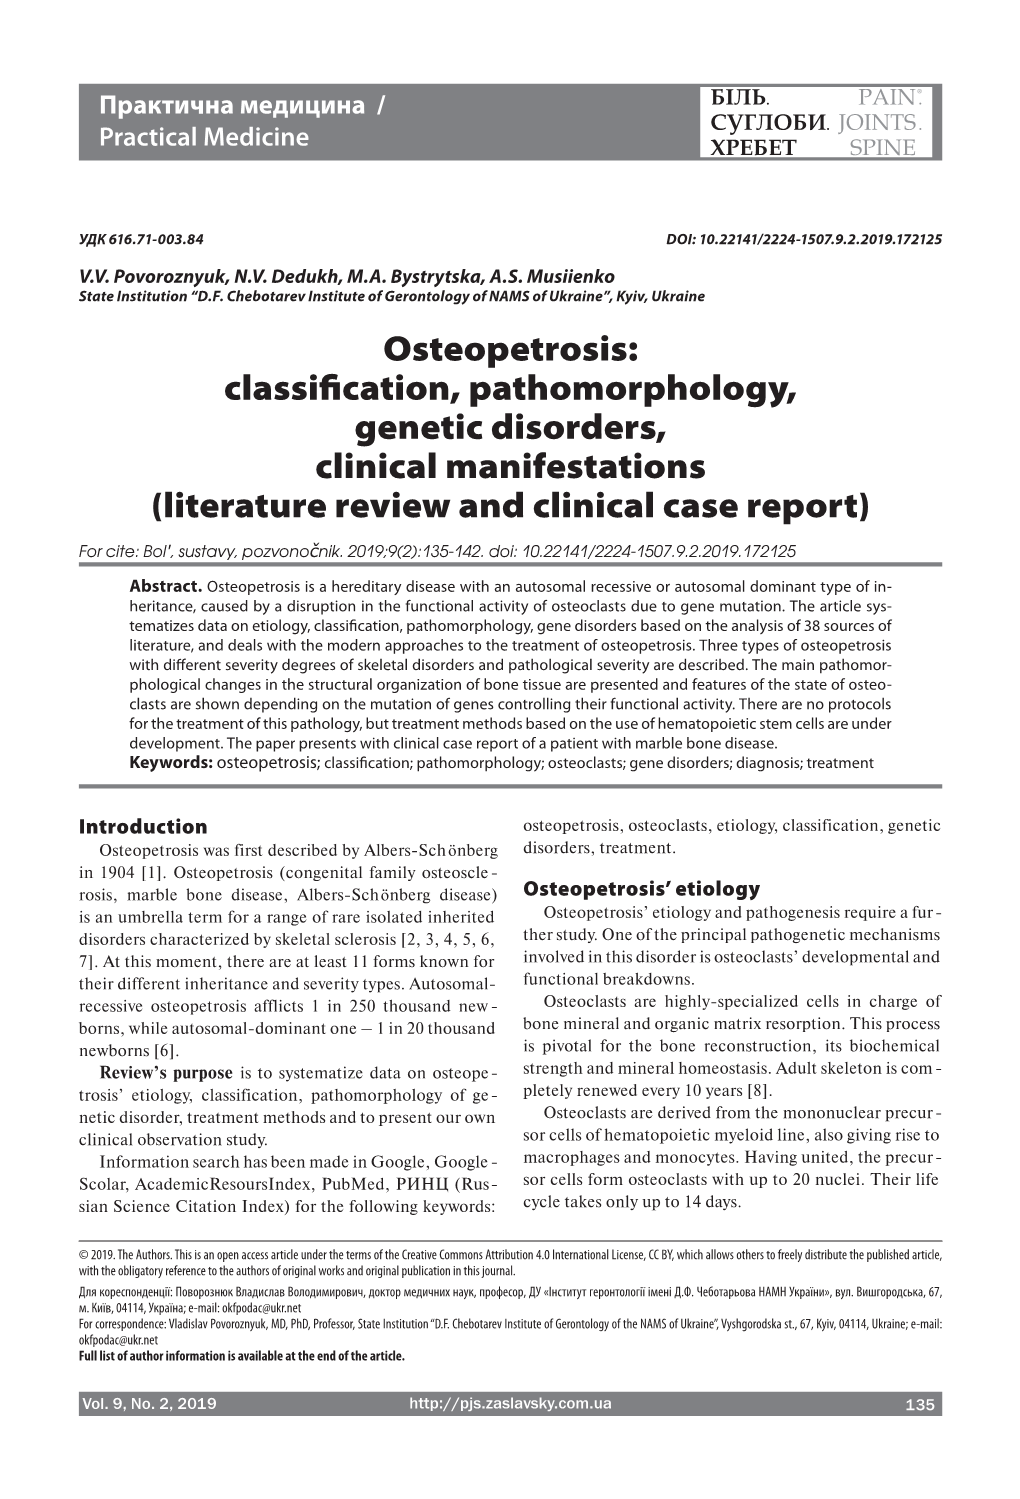 Osteopetrosis: Classification, Pathomorphology, Genetic Disorders, Clinical Manifestations (Literature Review and Clinical Case Report)